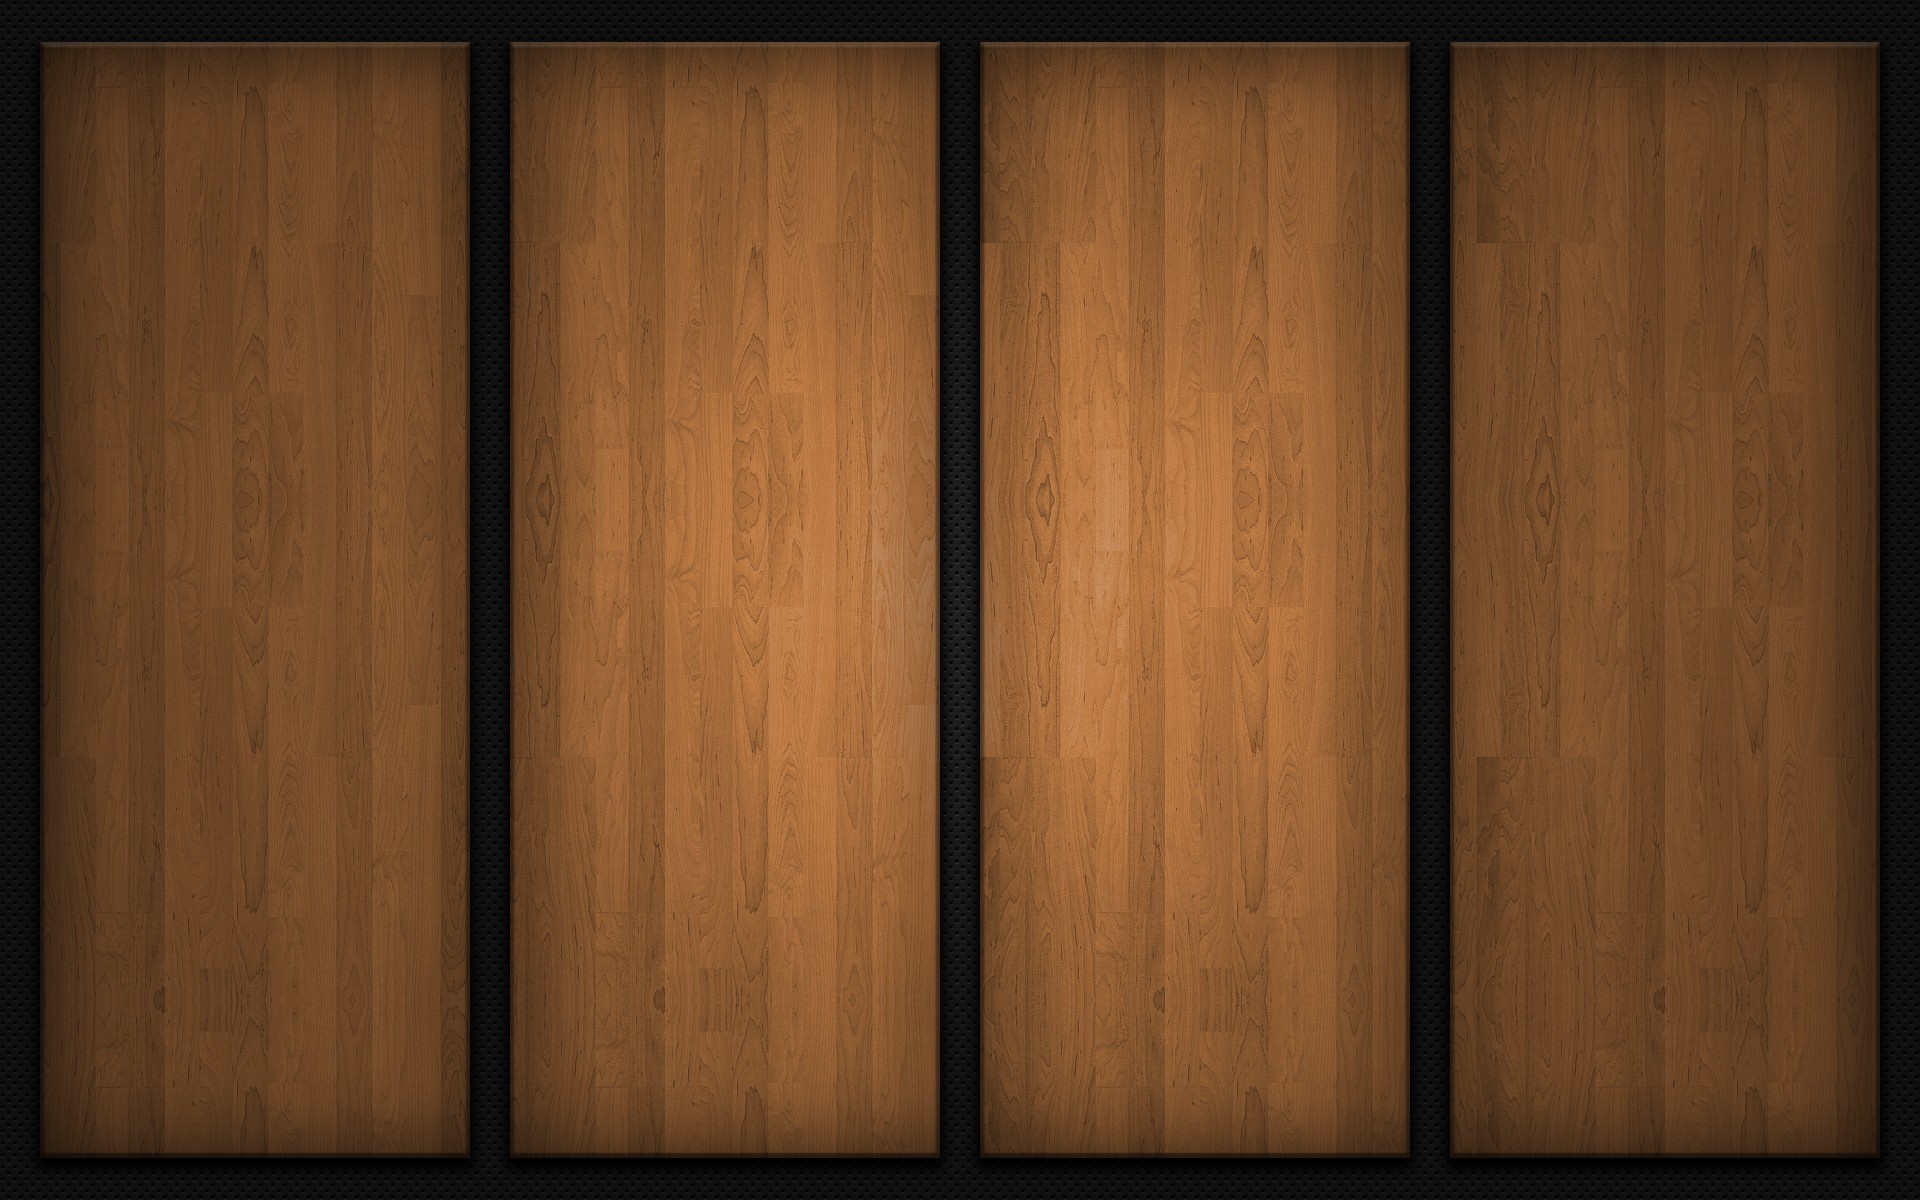 General 1920x1200 wood texture wooden surface pattern